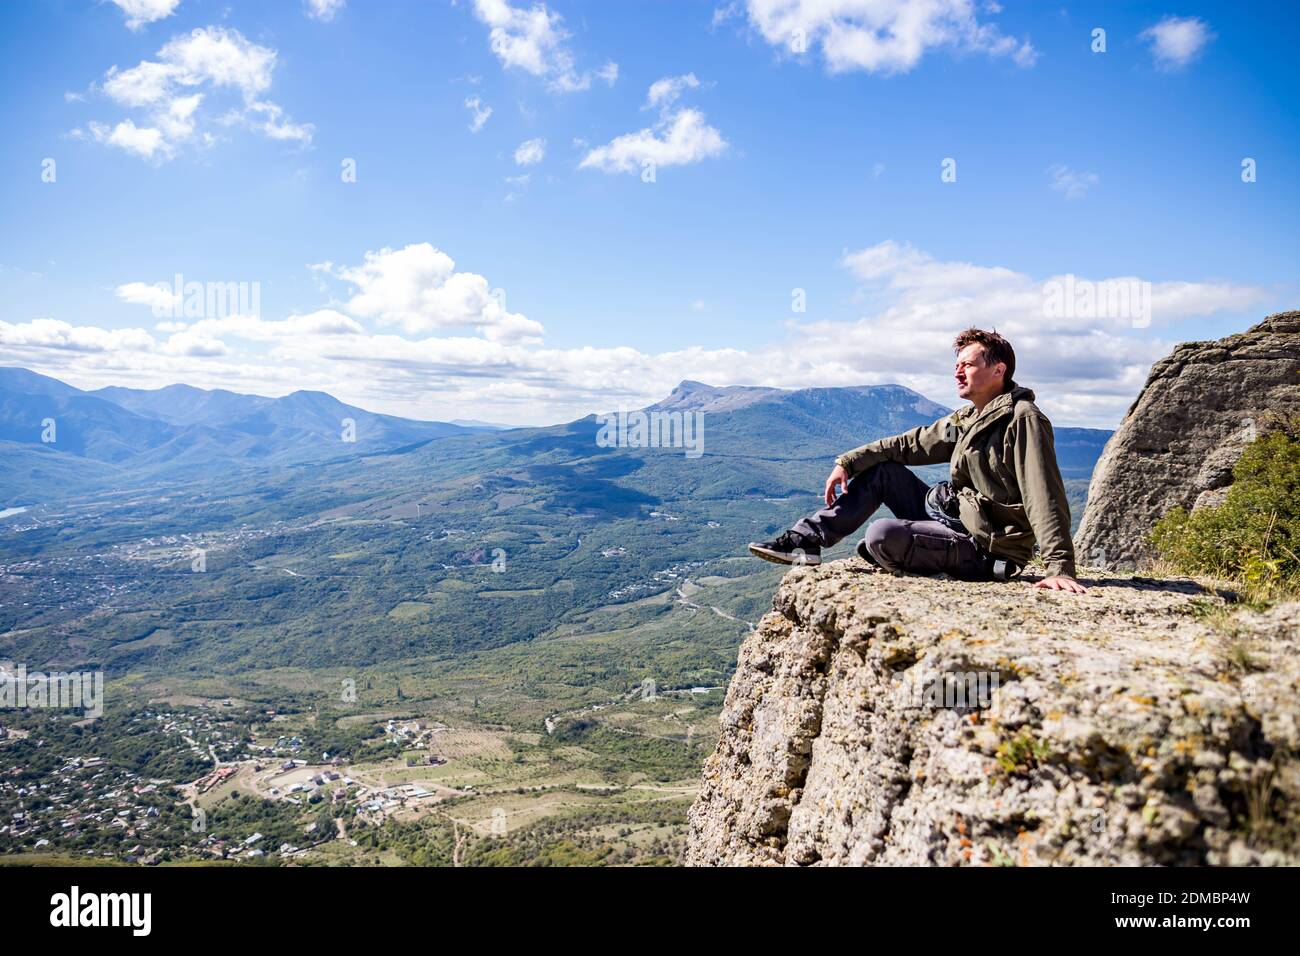 Male Hiker Sitting On Cliff Against Blue Sky Stock Photo